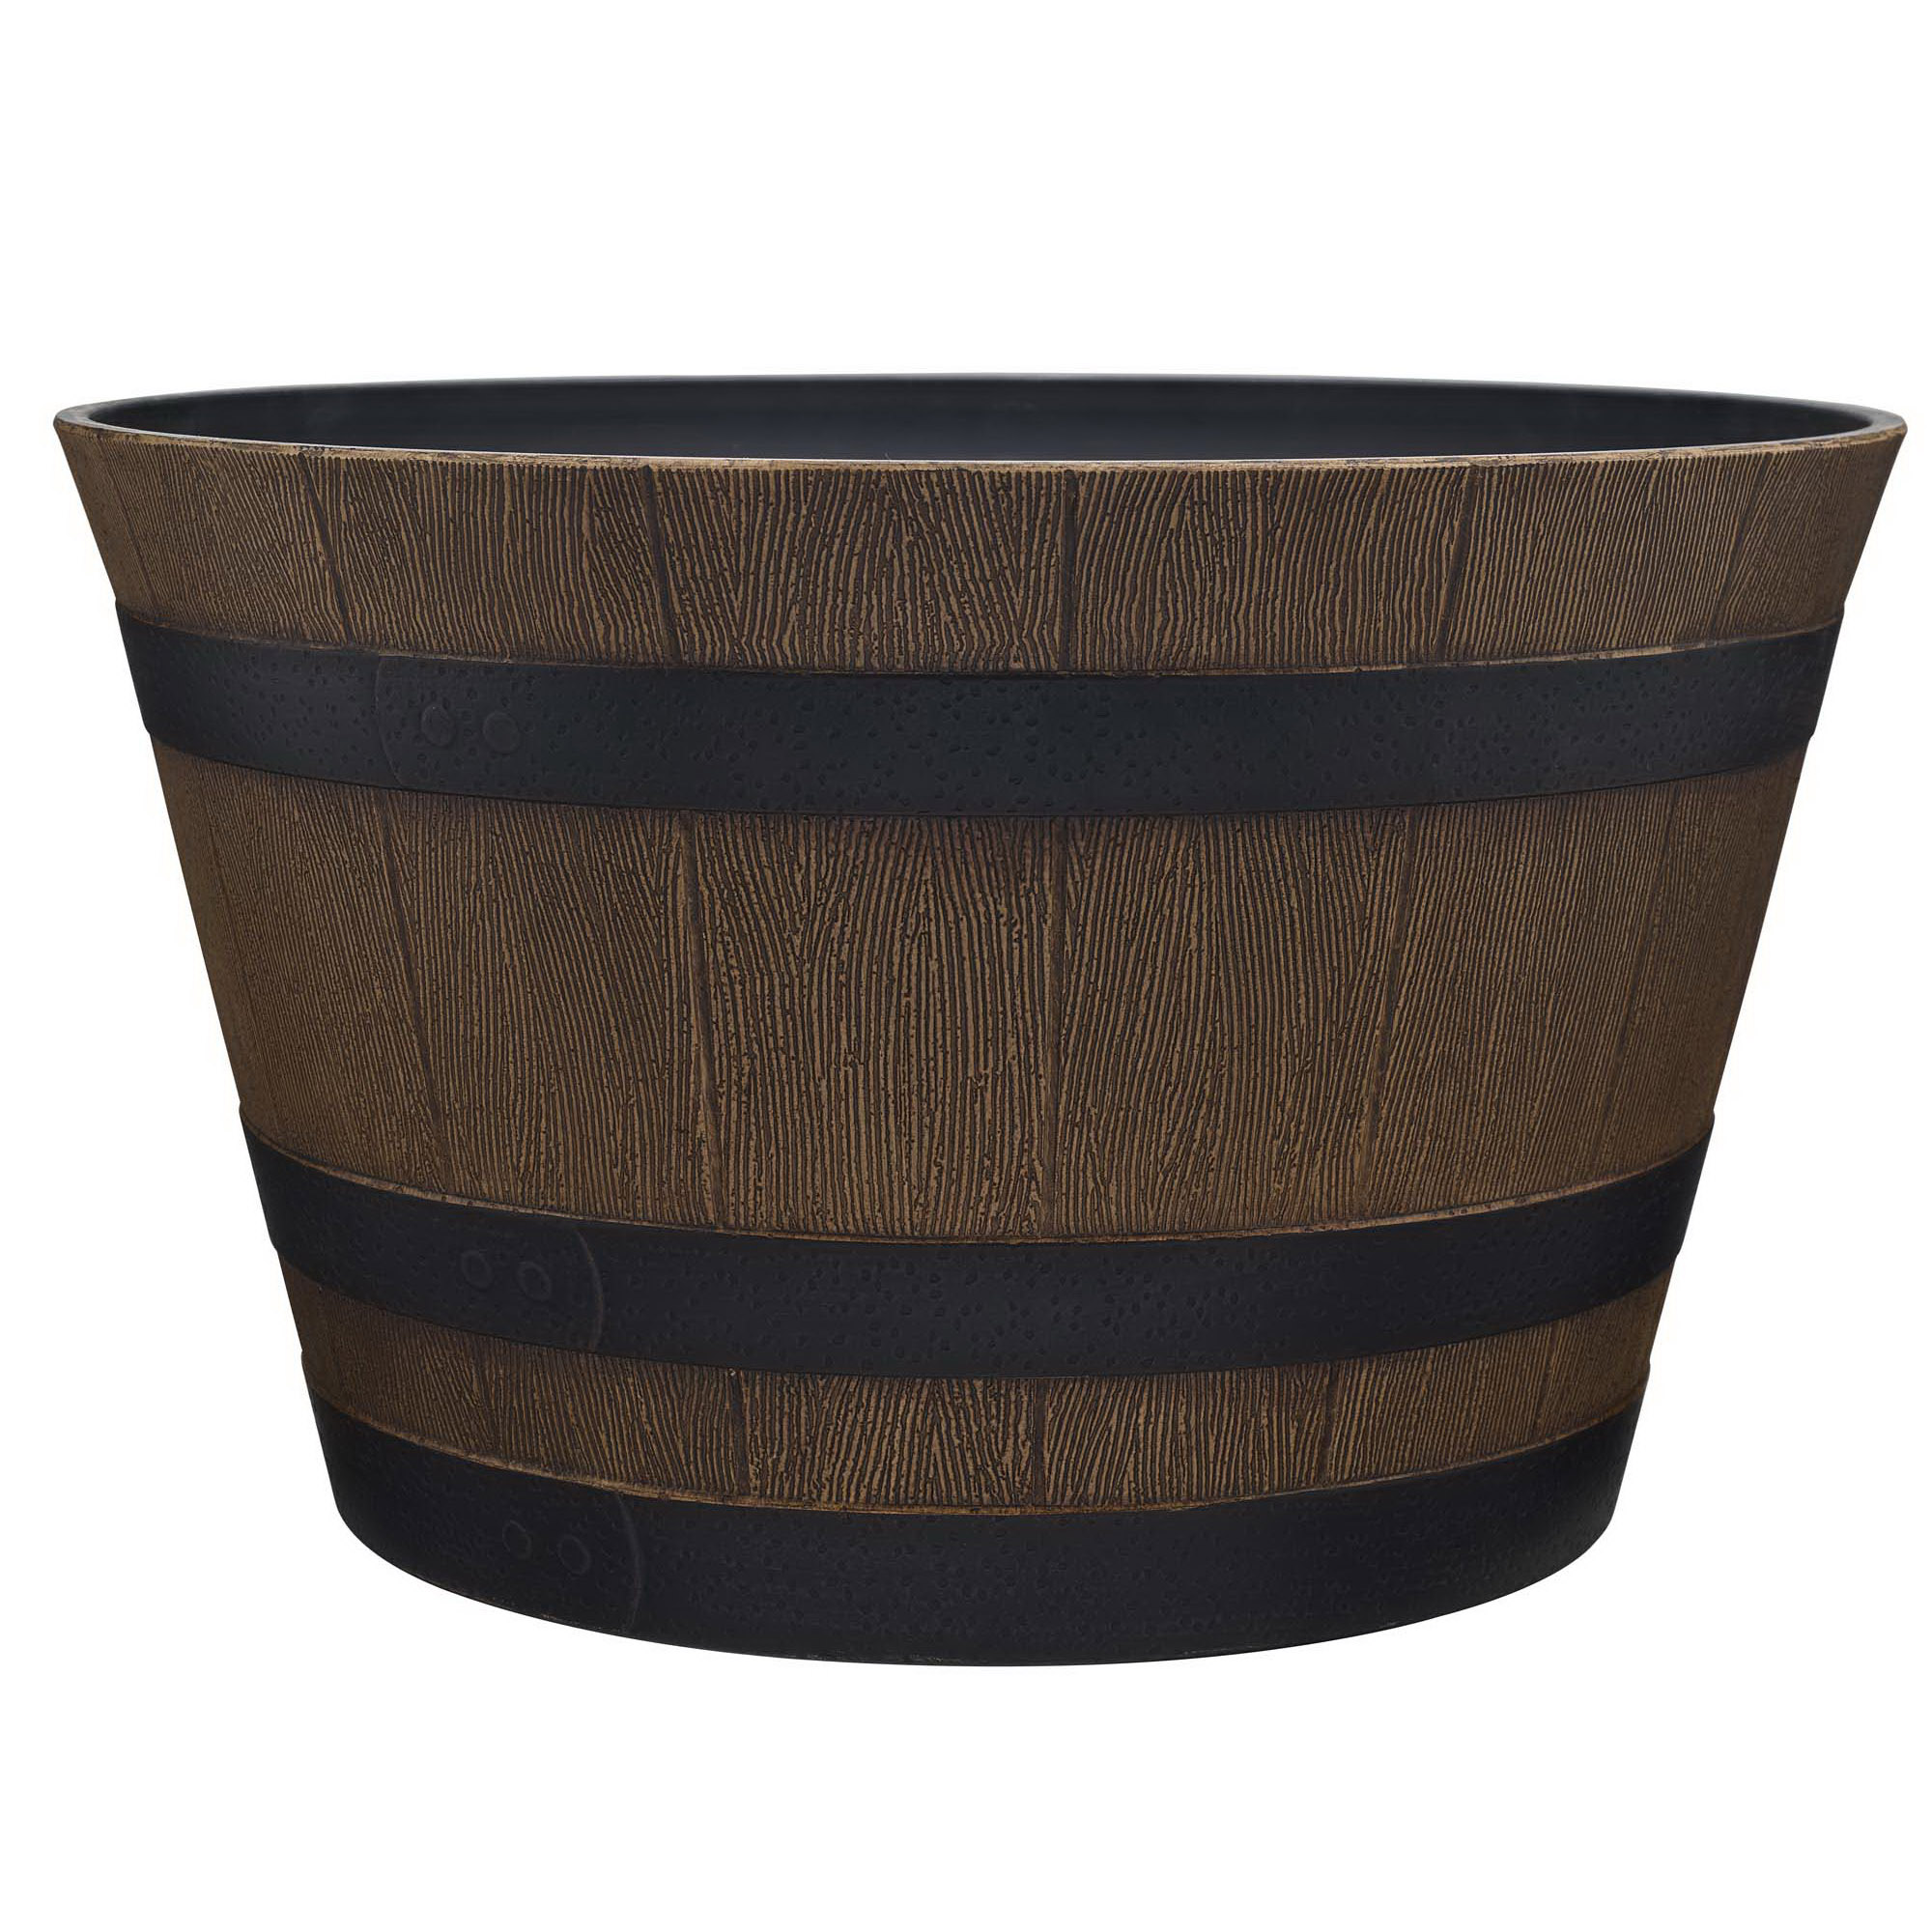 HDR-055471 Planter, 13.04 in H, 22.24 in W, 22.24 in D, Round, Whiskey Barrel Design, Resin, Natural Oak